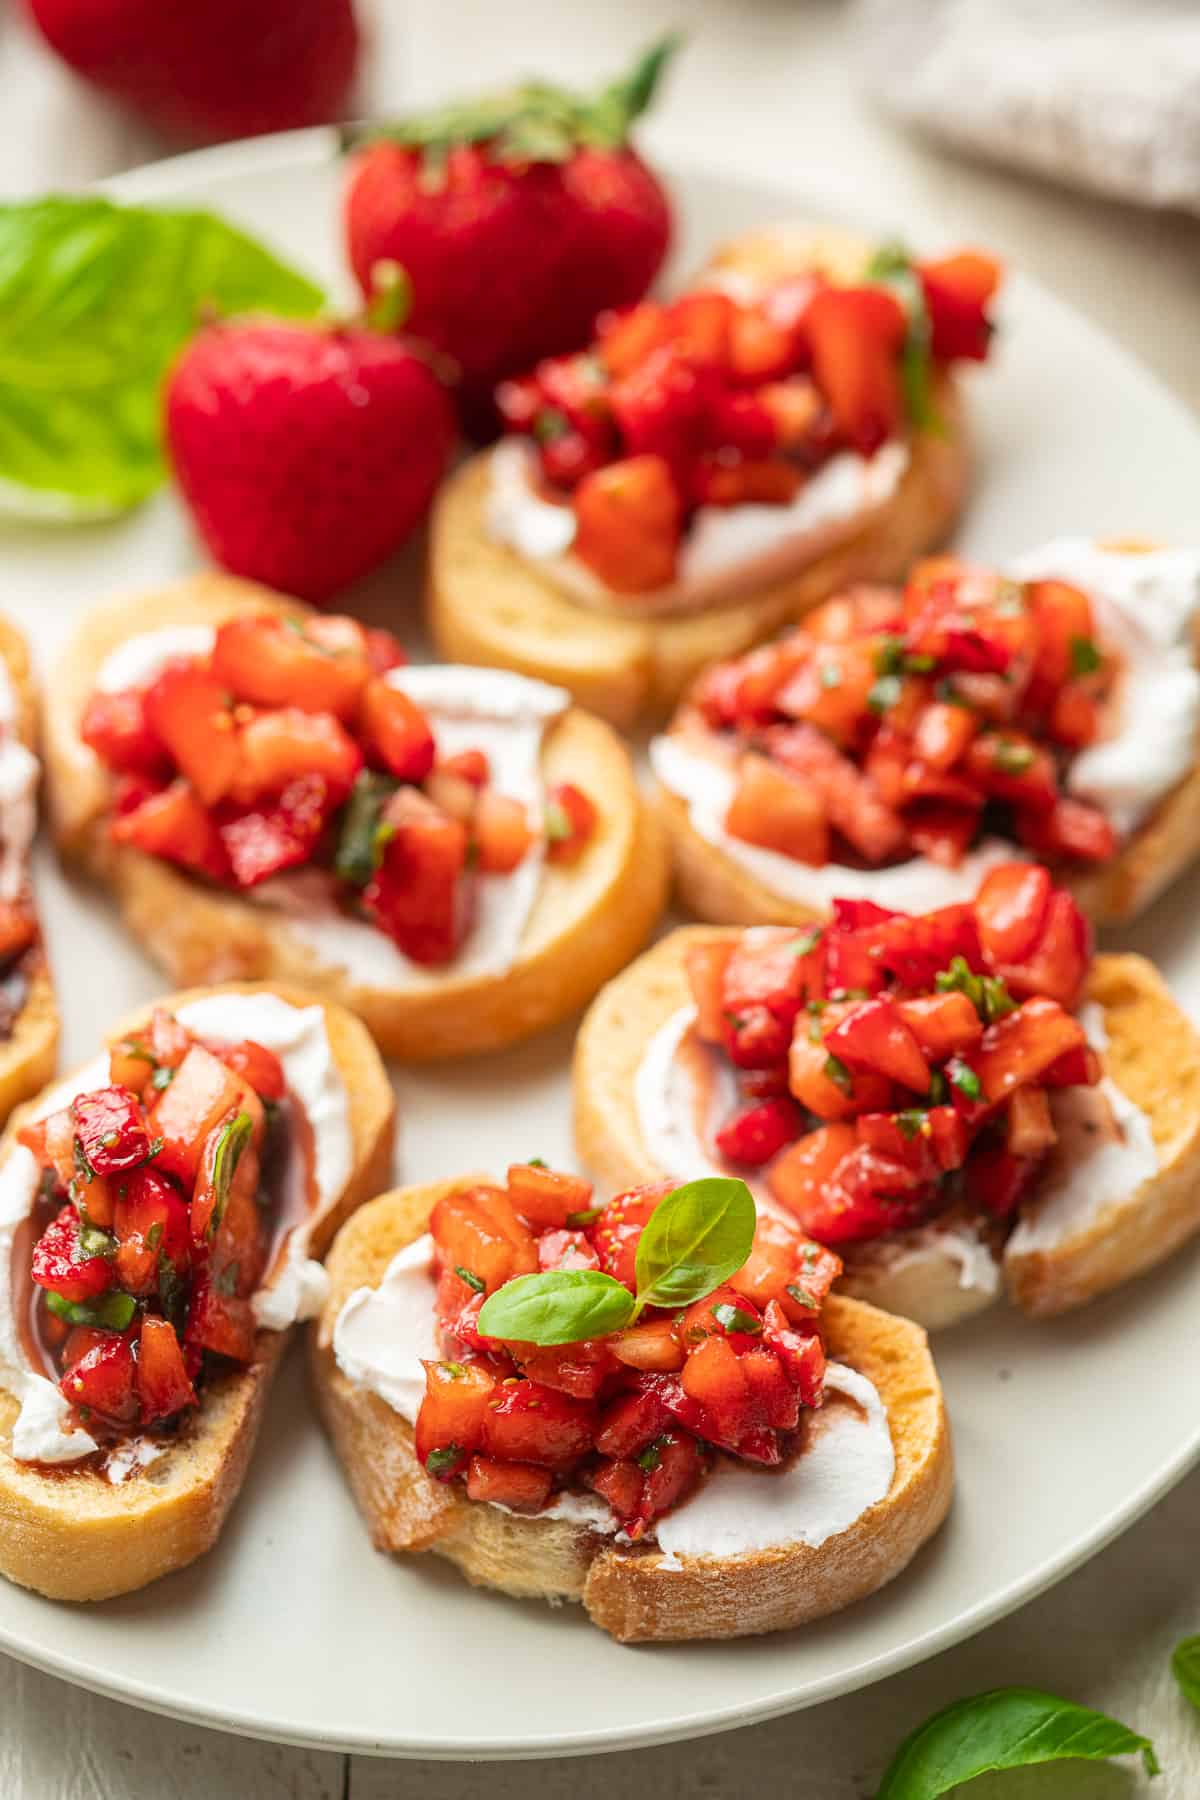 Baguette slices with vegan cheese and Strawberry Bruschetta arranged on a plate.